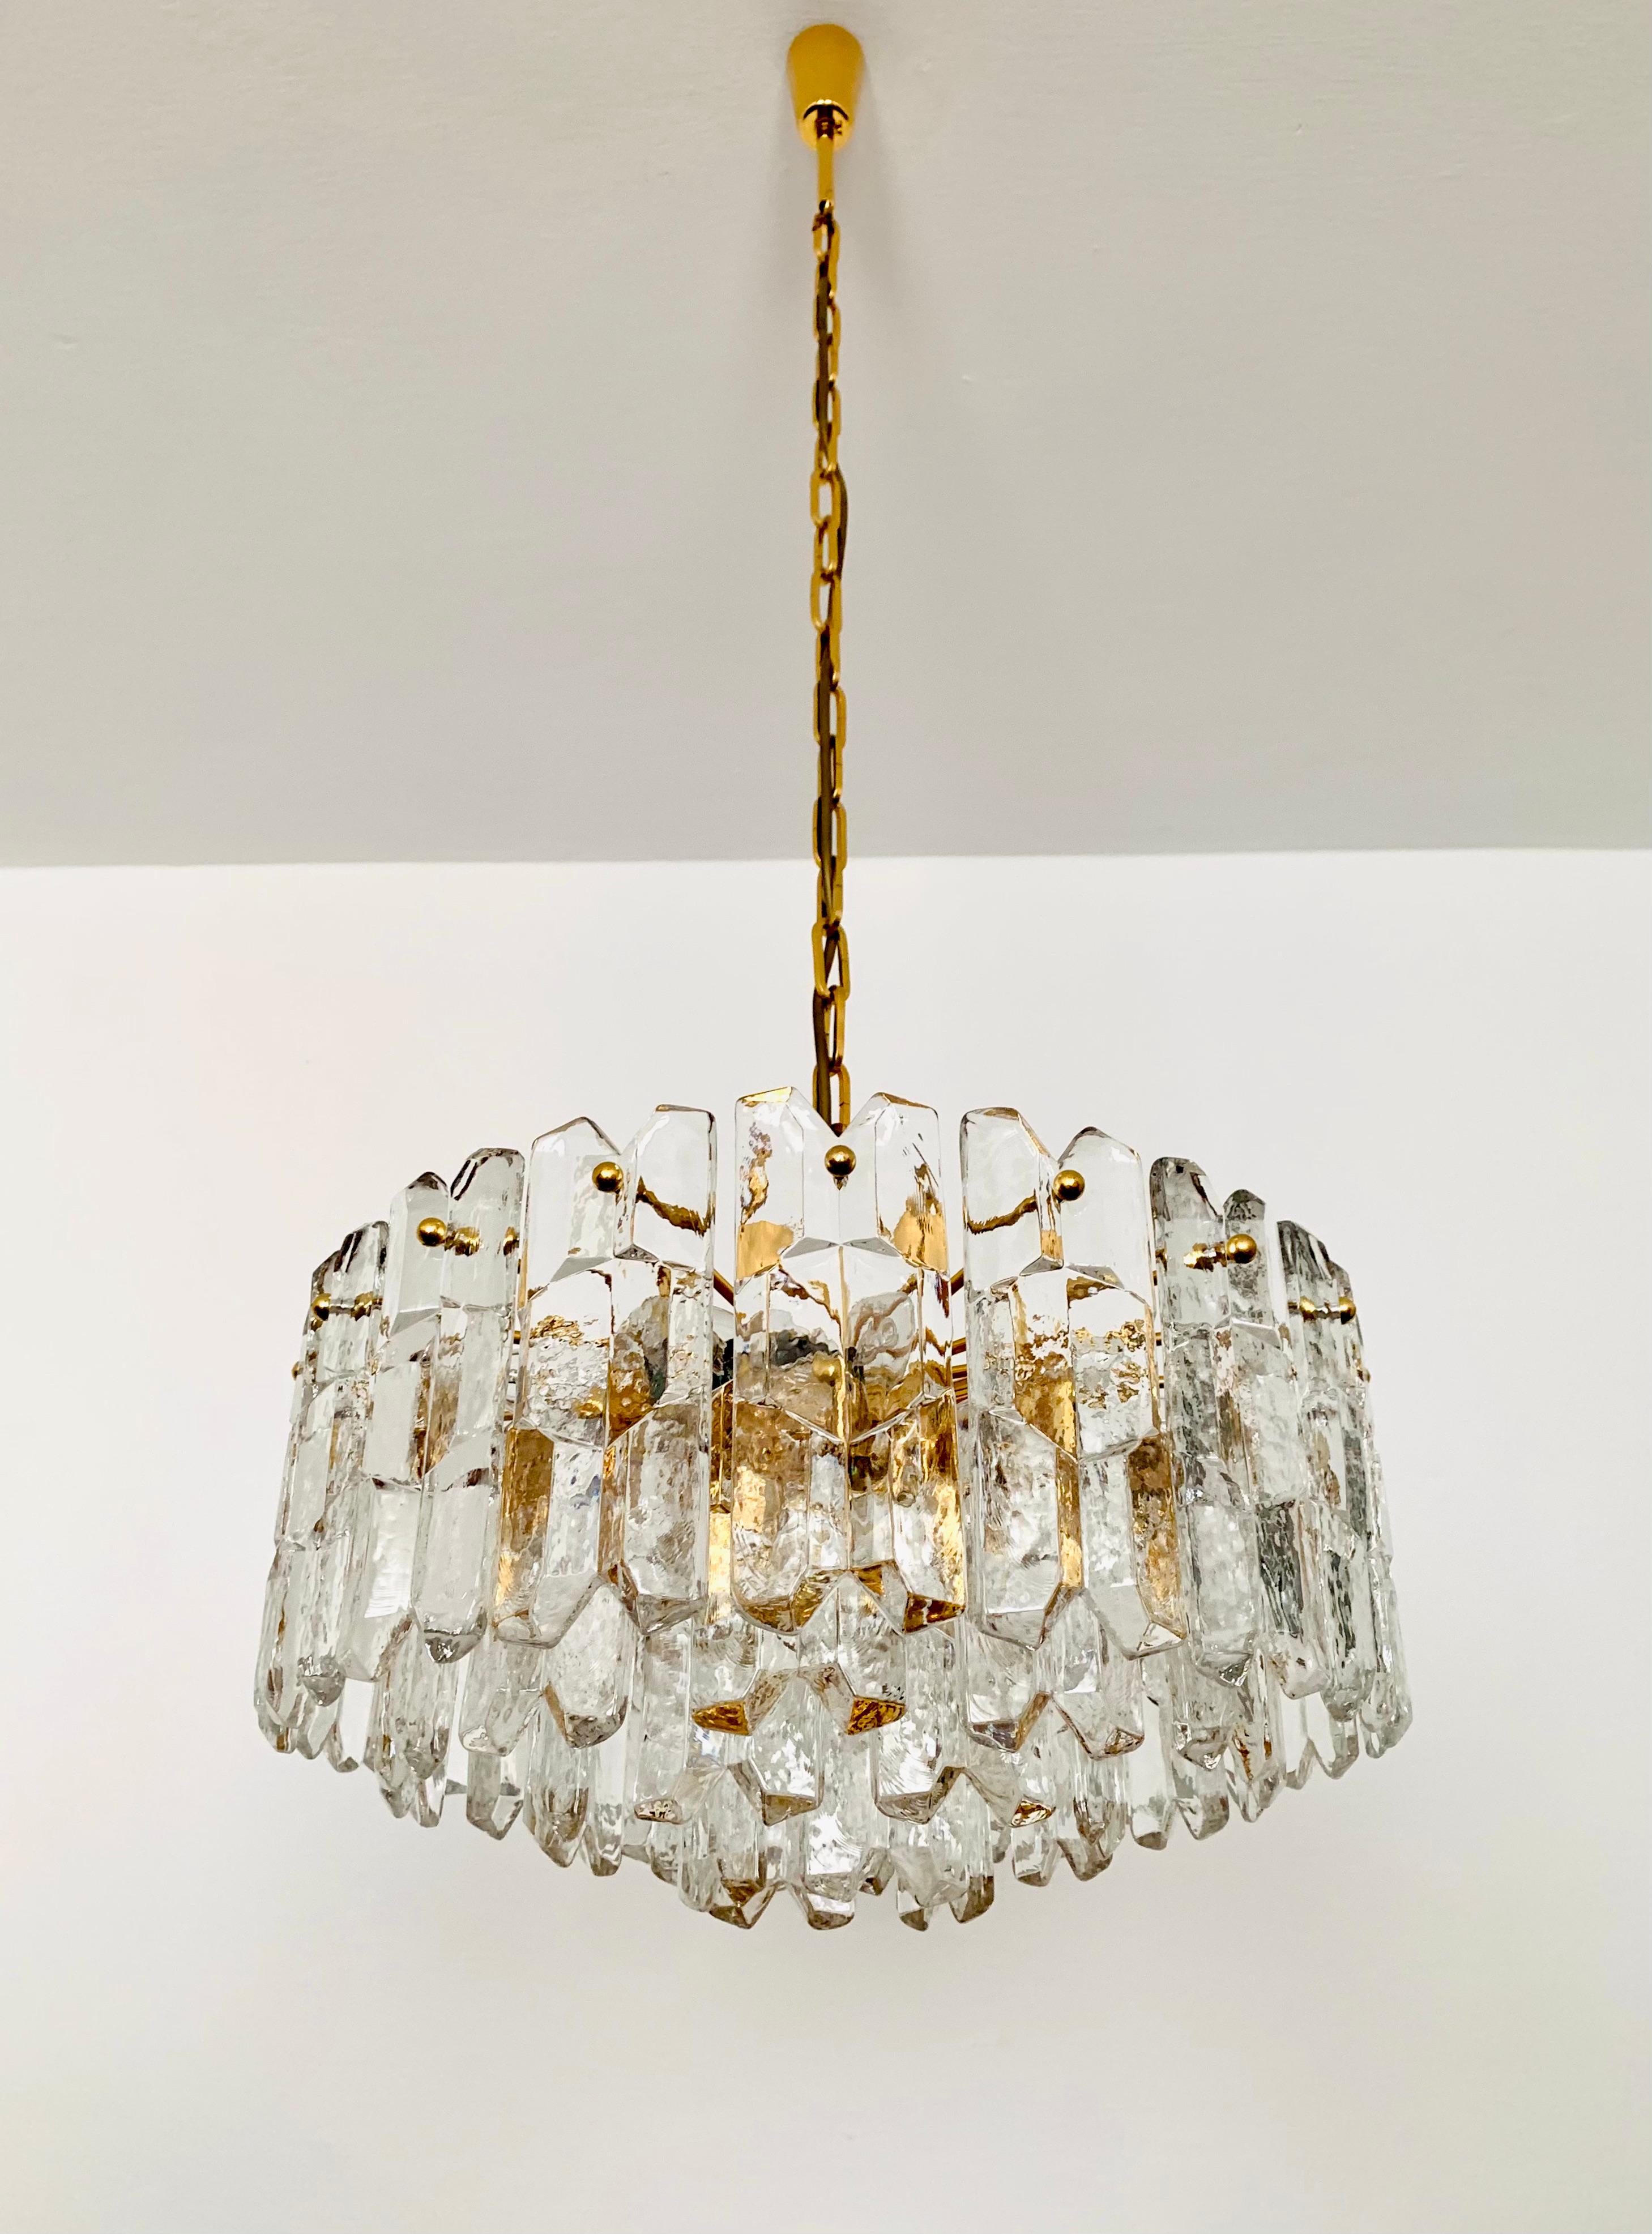 Wonderful and large ice glass chandelier from the 1960s.
The 42 beautifully shaped Murano glass elements create an impressive, sparkling play of light.
Exceptionally high-quality workmanship.
Very noble and luxurious appearance and a real